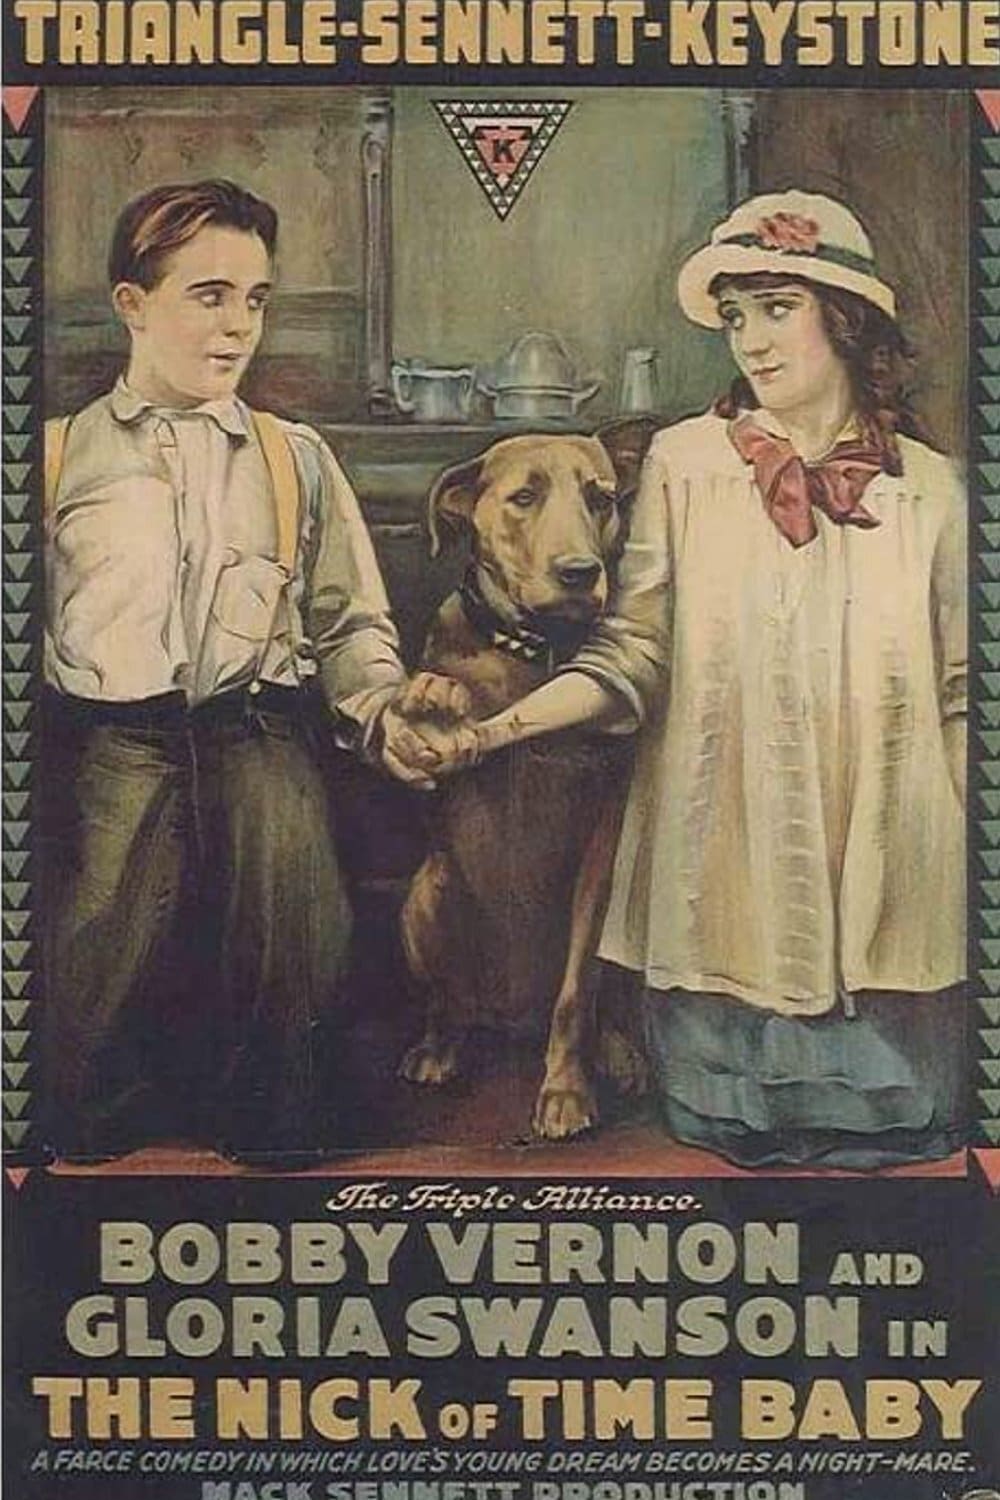 The Nick of Time Baby (1916)